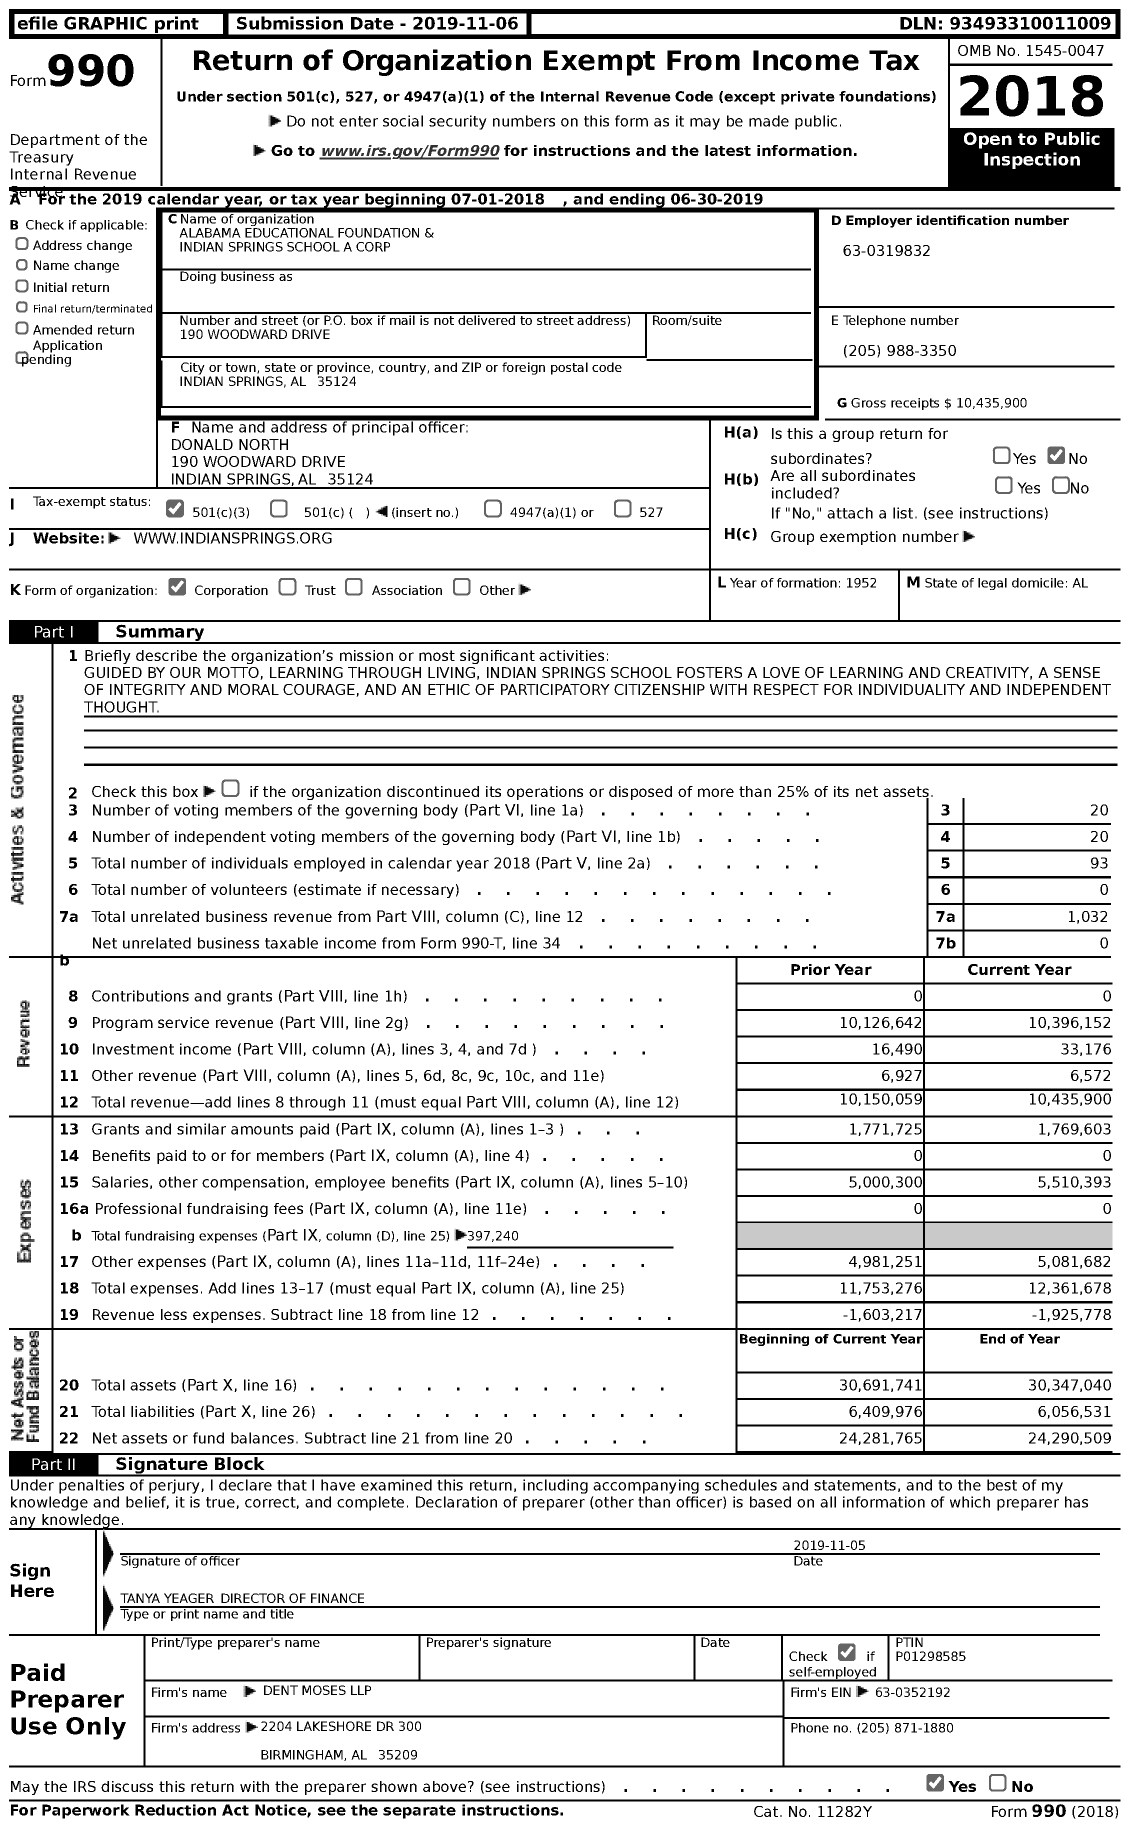 Image of first page of 2018 Form 990 for Alabama Educational Foundation and Indian Springs School A Corporation